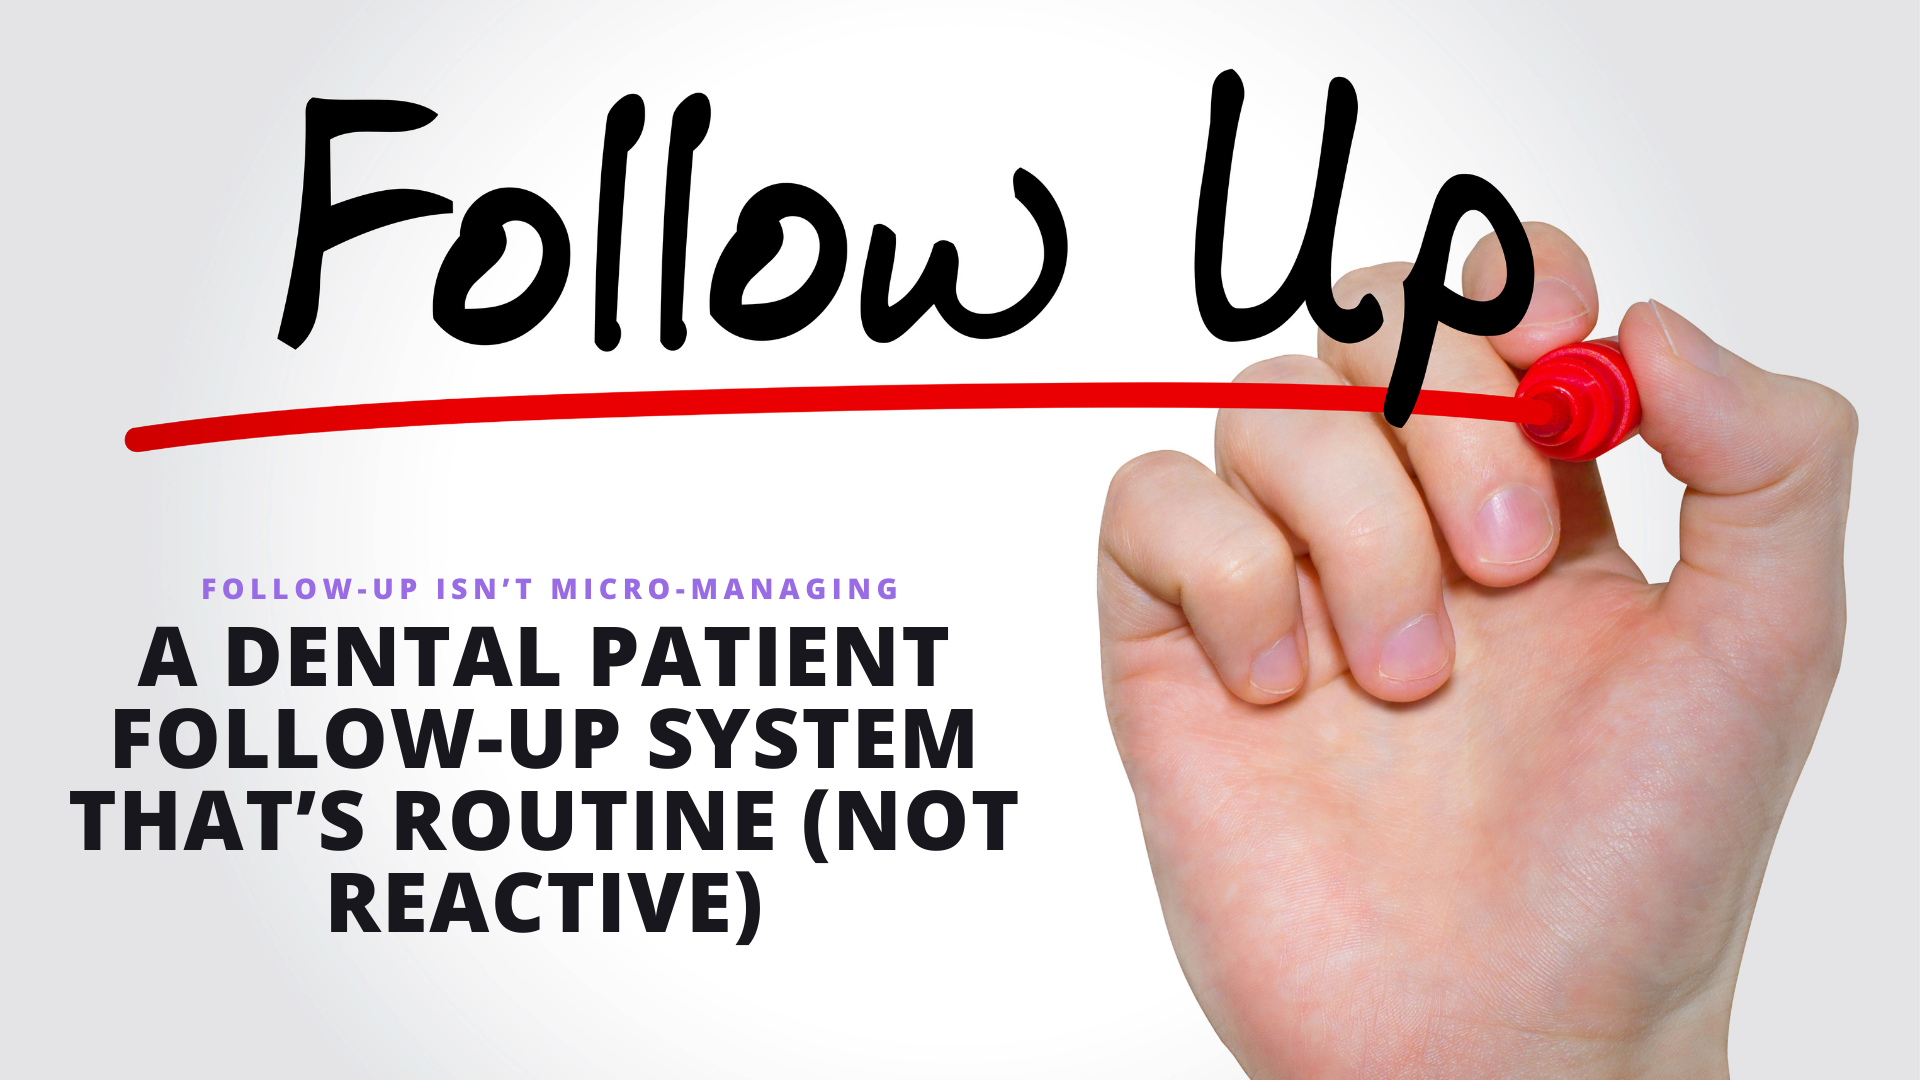 A Dental Patient Follow-Up System That’s Routine (Not Reactive)